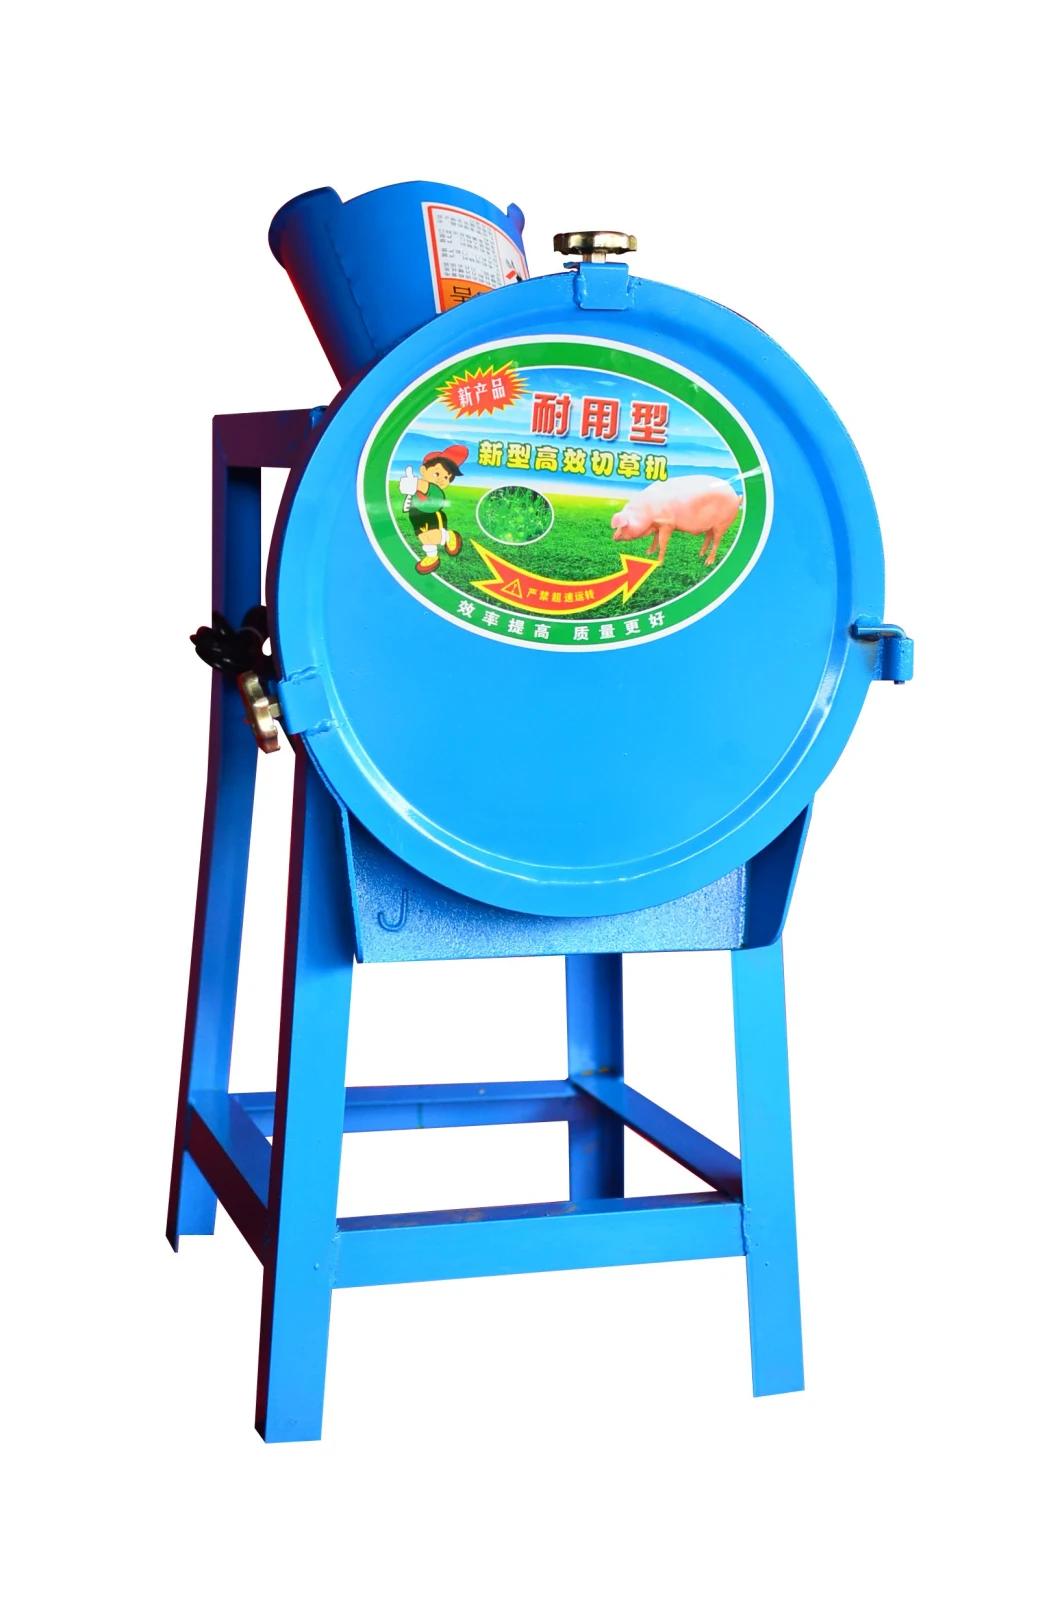 Fodder Cutter Machine for Farm Animal Feeding Any Testing Our Machine with The Raw Material Is Highly Appreciated